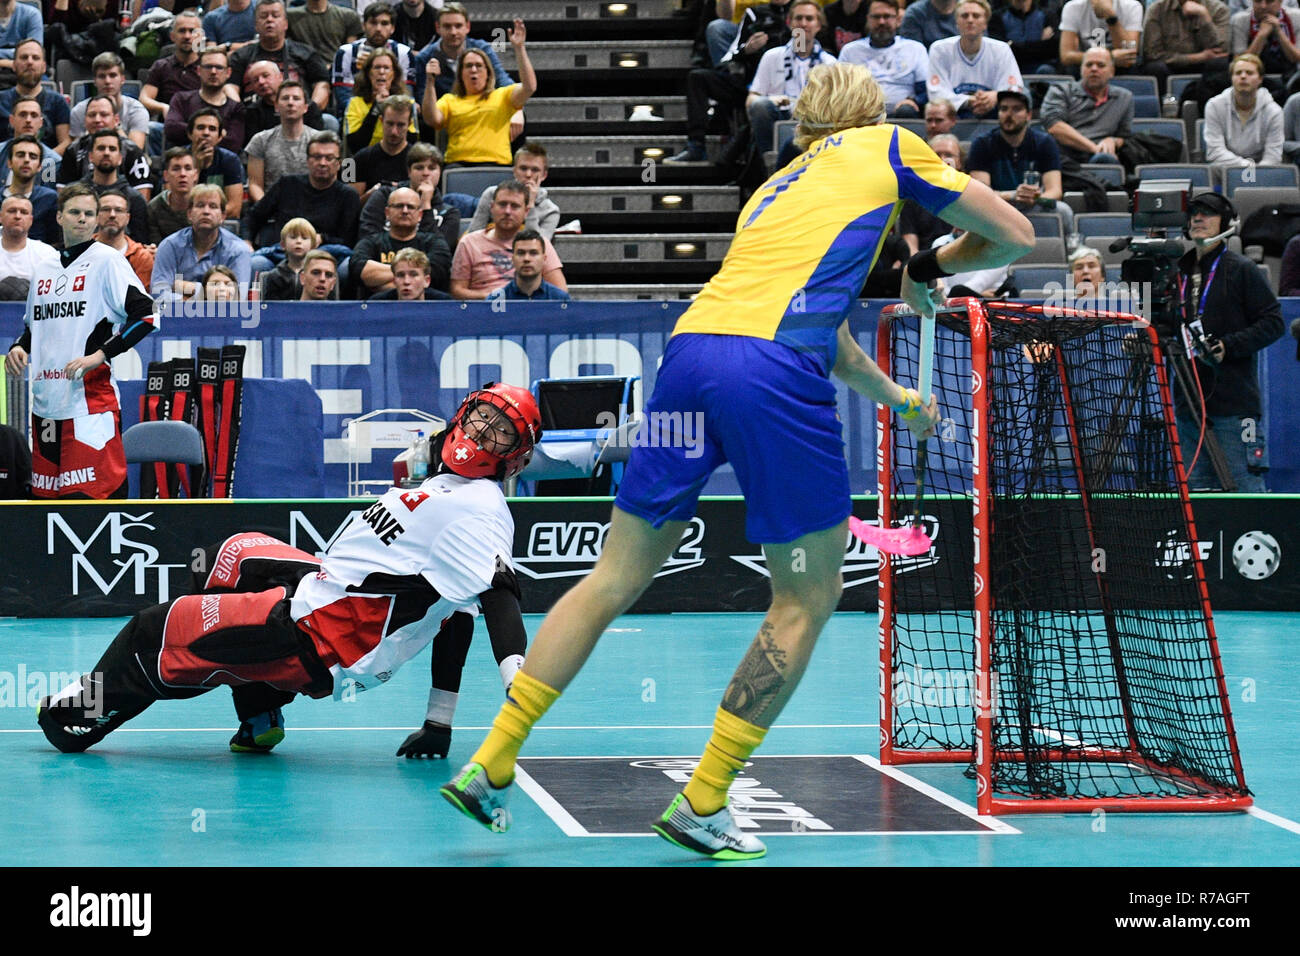 Prague, Czech Republic. 08th Dec, 2018. From right KIM NILSSON of Sweden  and goalie PASCAL MEIER of Switzerland in action during the Men's World  Floorball Championships match Switzerland vs Sweden, played in